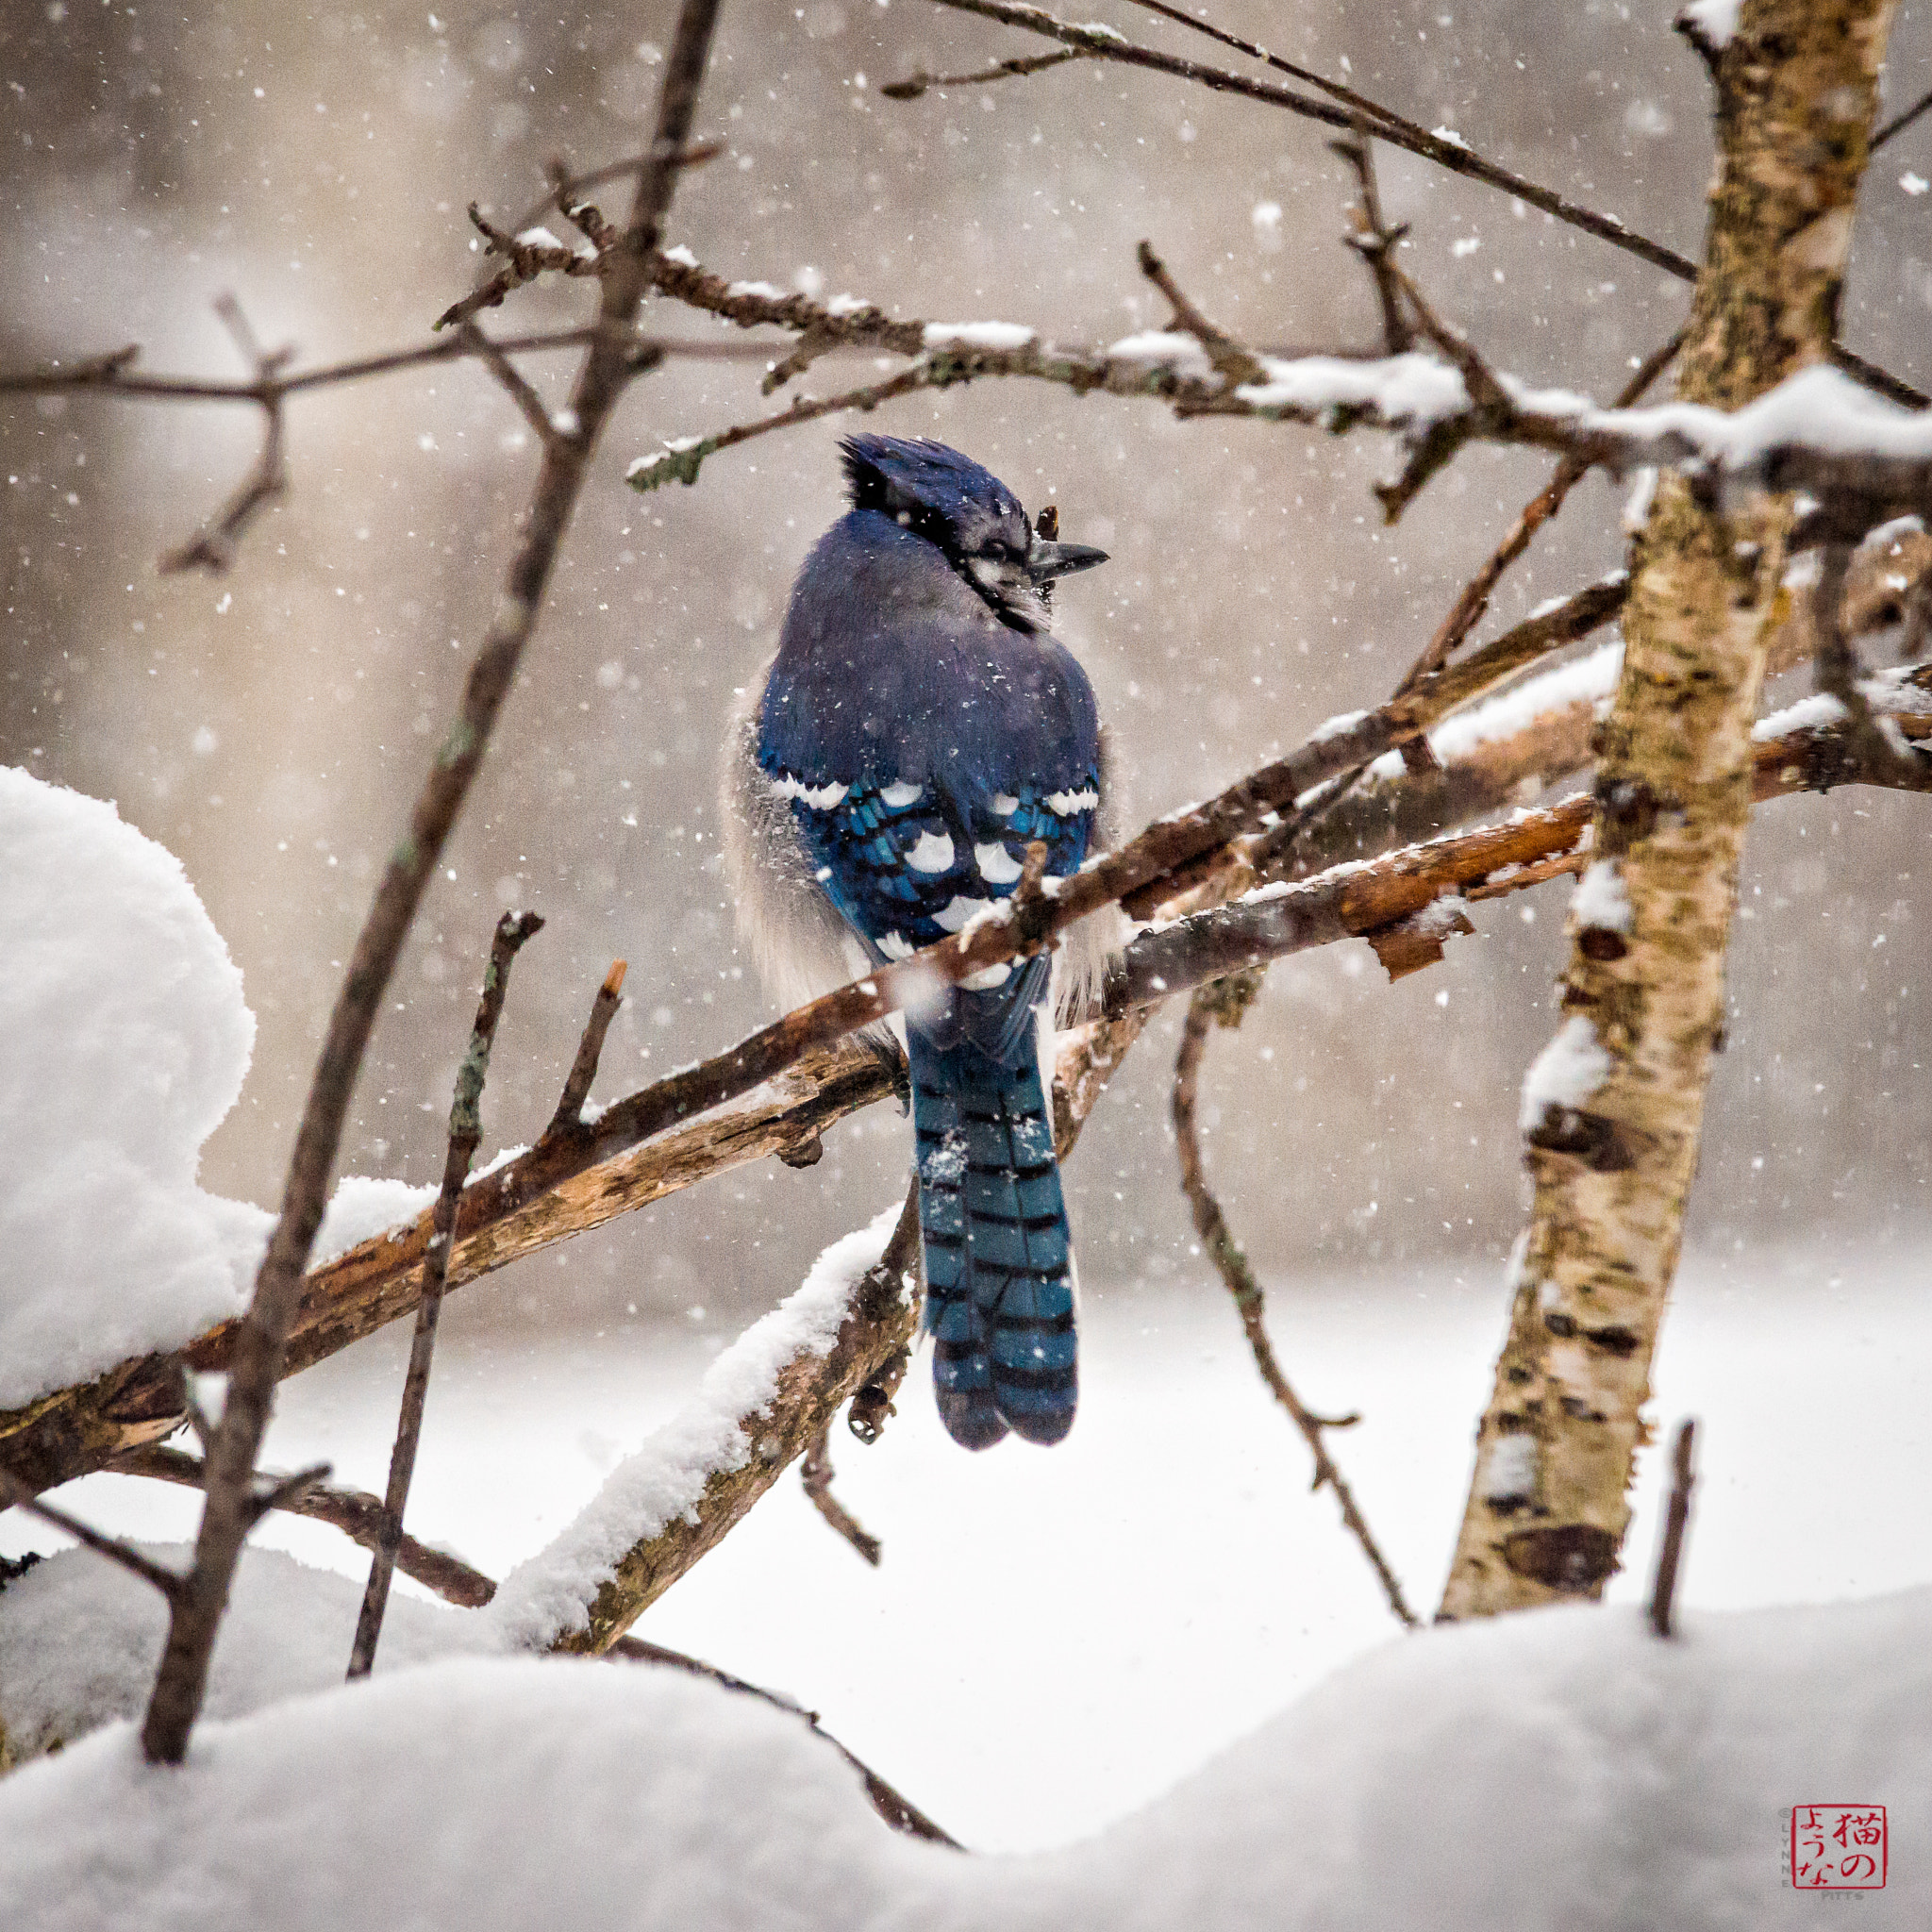 Nikon D800 sample photo. Snowing on the bluejay photography